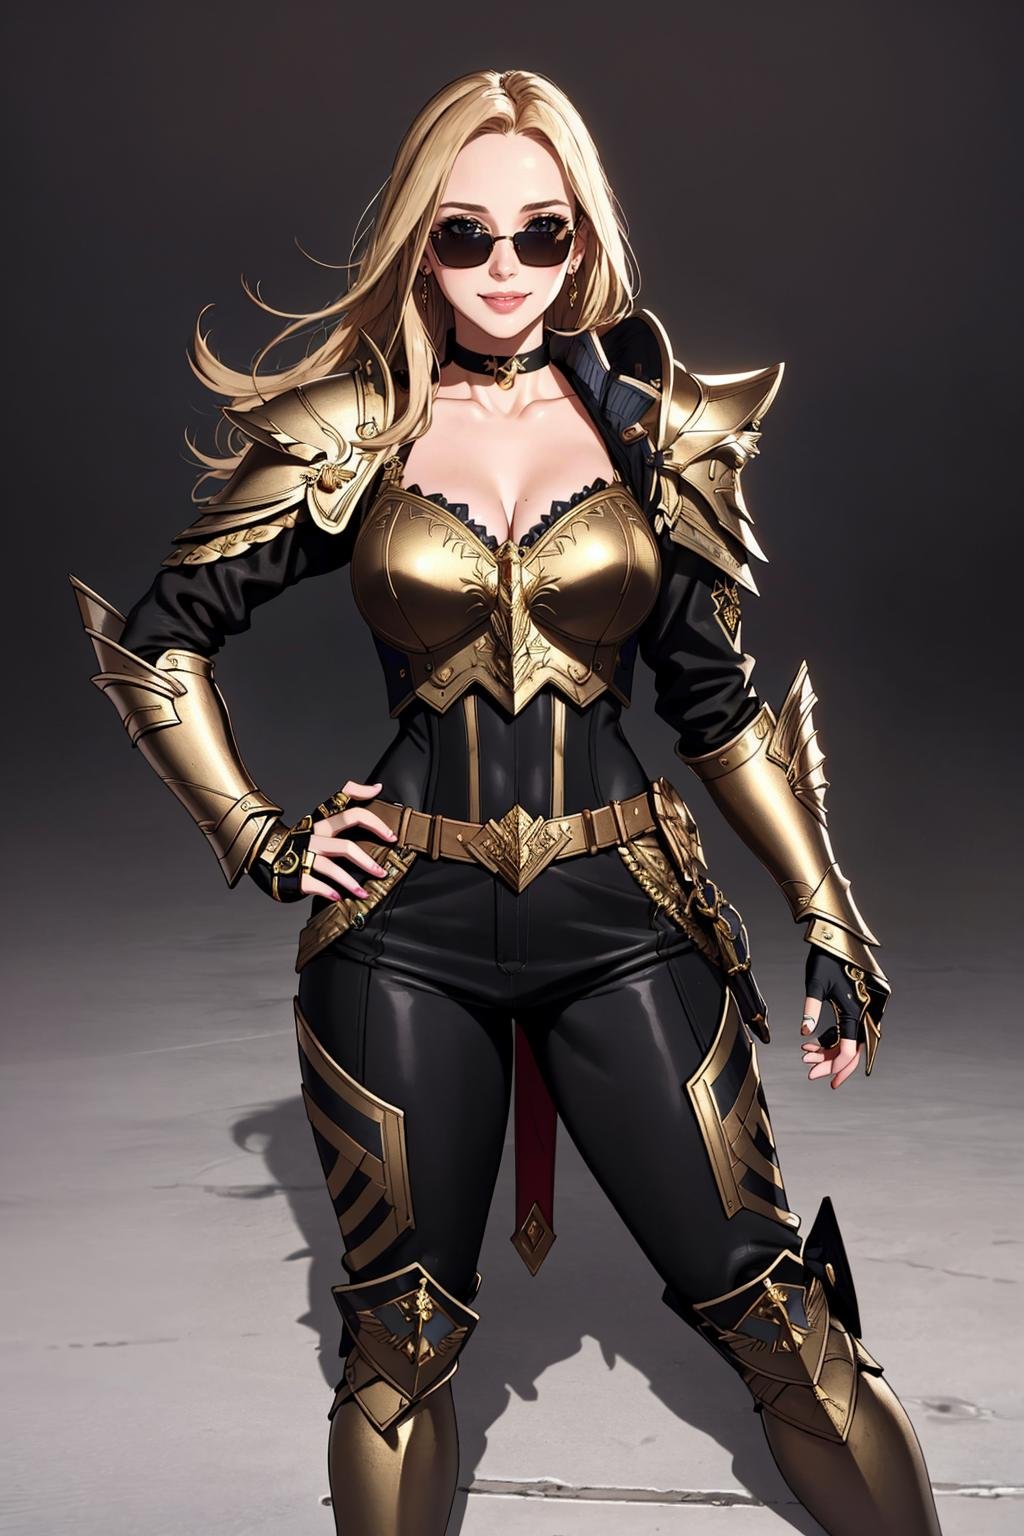 ((Masterpiece, best quality,edgQuality)),smiling,excited,full bodyedgGolden, a woman dressed in golden armor ,wearing edgGoldenBlonde Nadia with (sunglasses and a choker)<lora:Ultimate_Nadia:0.5> <lora:edgNadiaGolden:0.8>